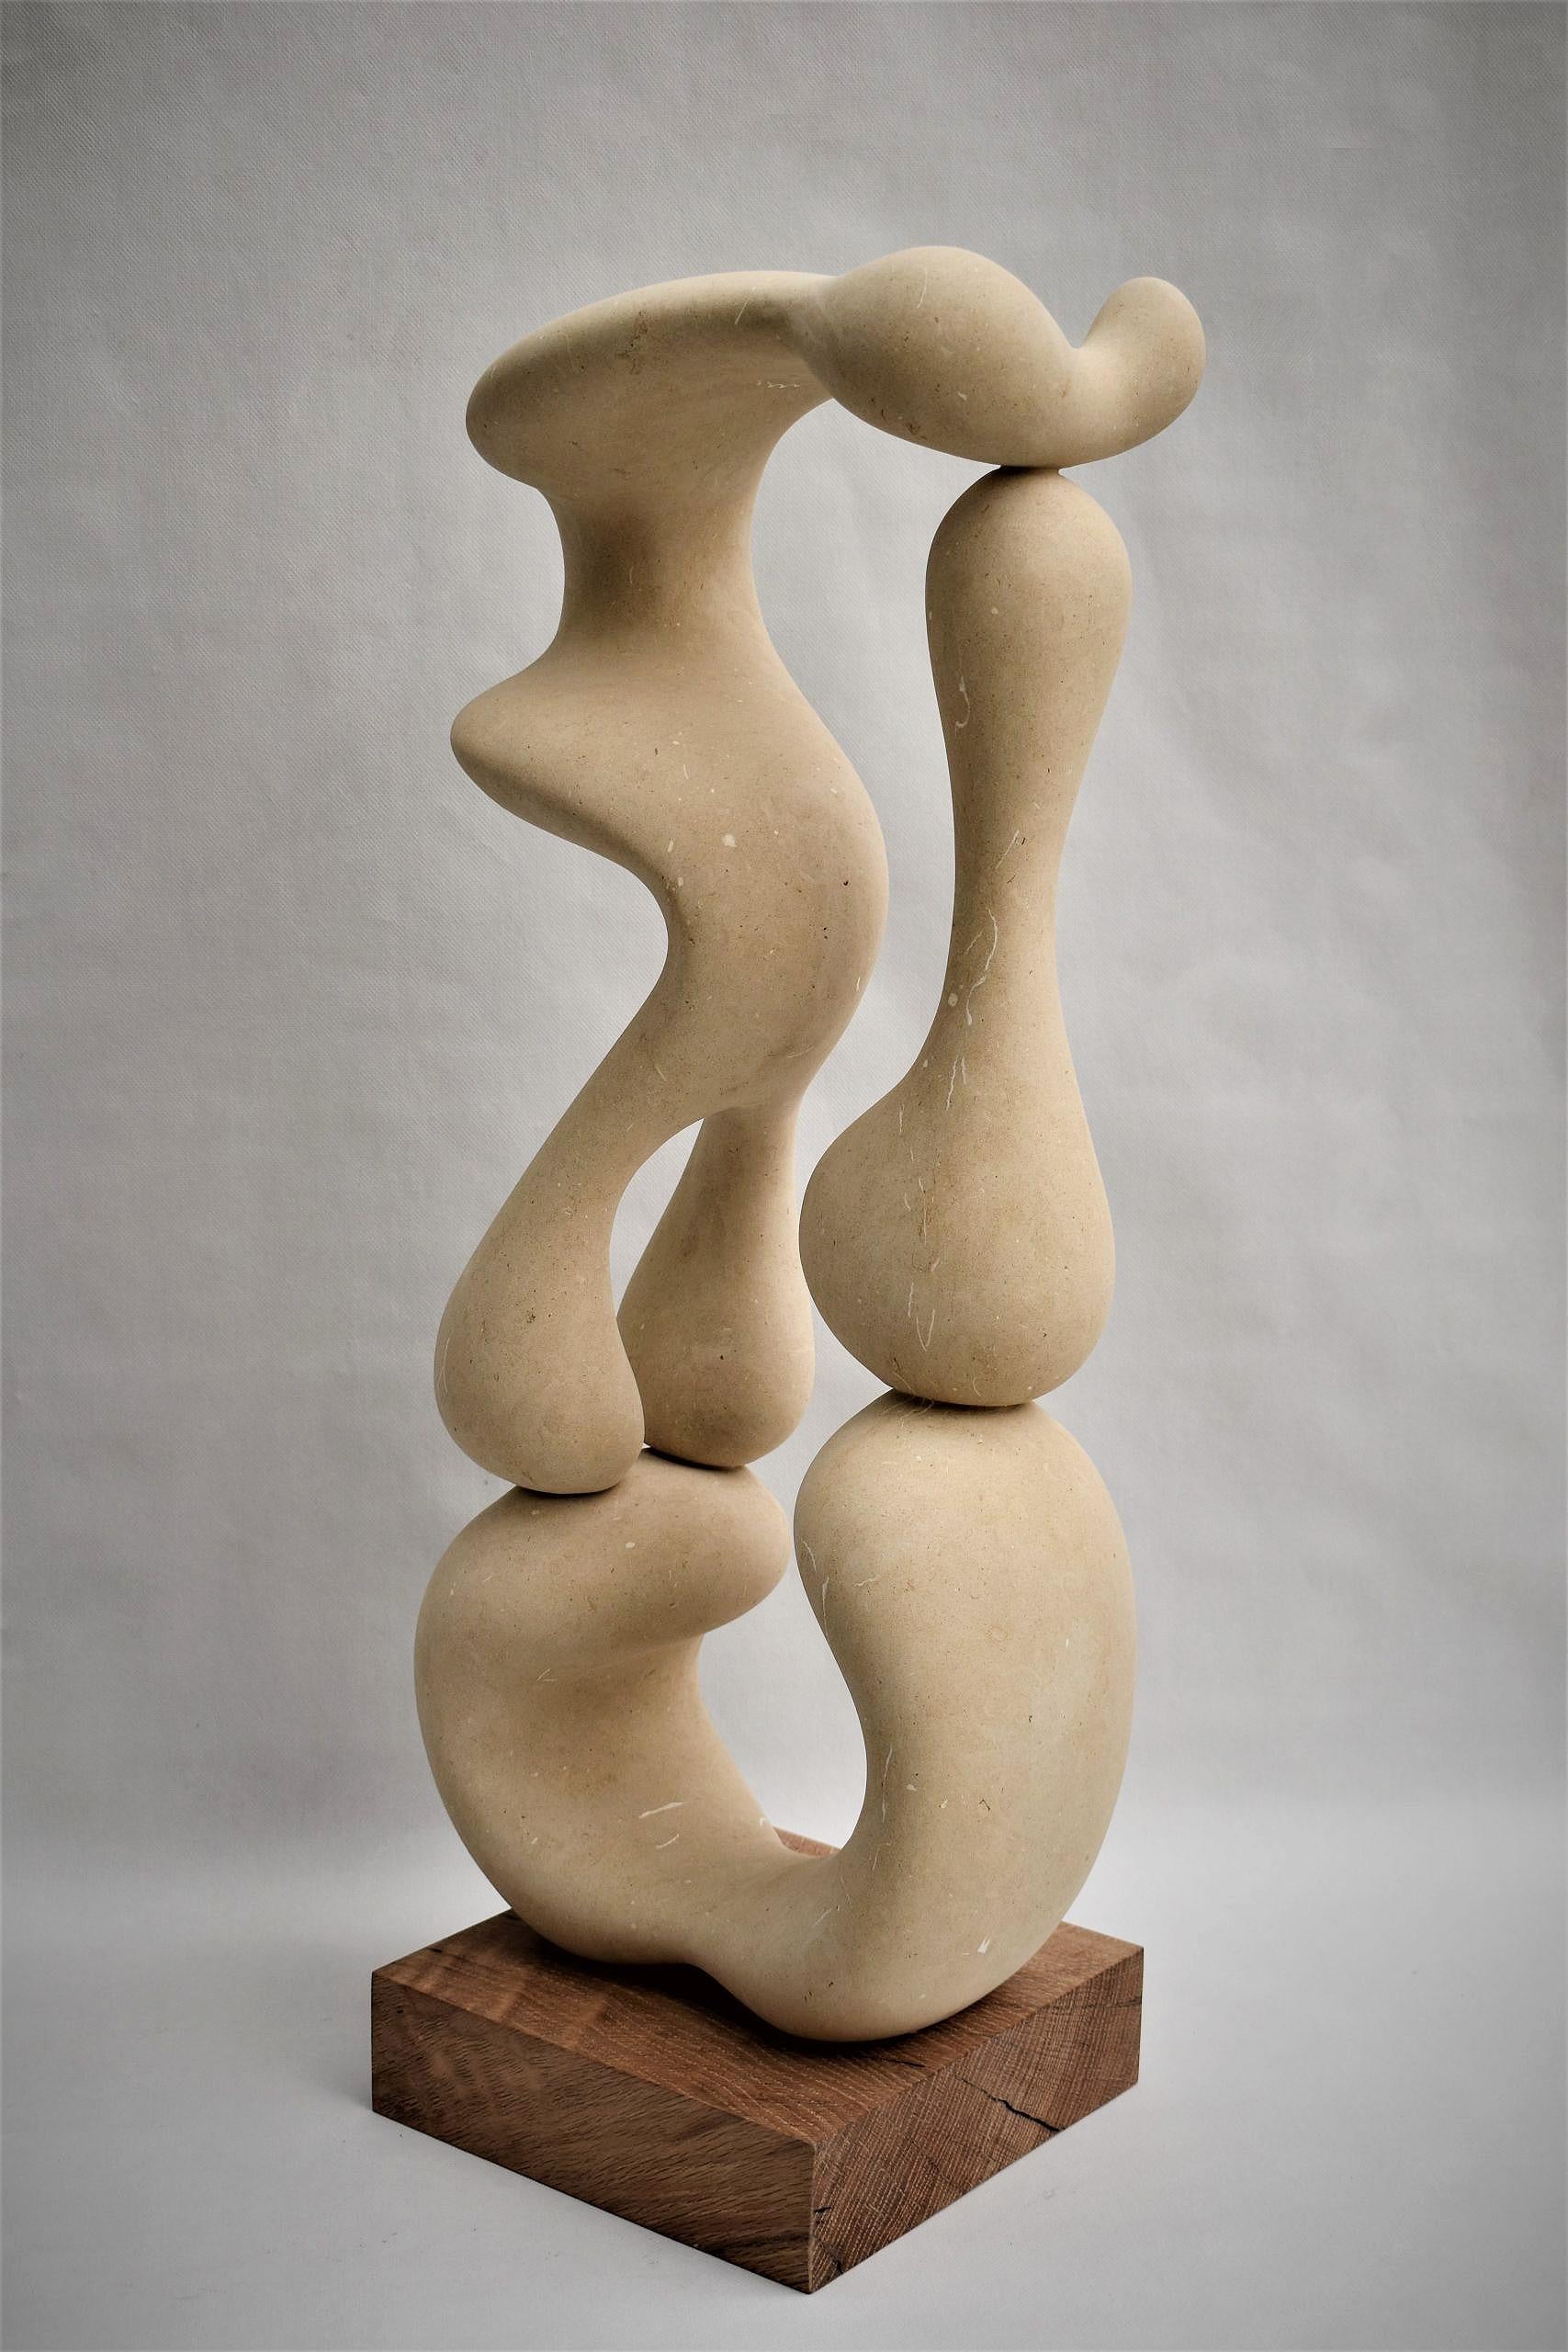 21st century abstract sculpture Cellulae by Renzo Buttazzo from Italy.

Sculpture in Lecce Stone.
Delivered with a certificate of authenticity.

Since 1886 Renzo Buttazzo work with Pietra Leccese (limestone from Lecce), and during this time he